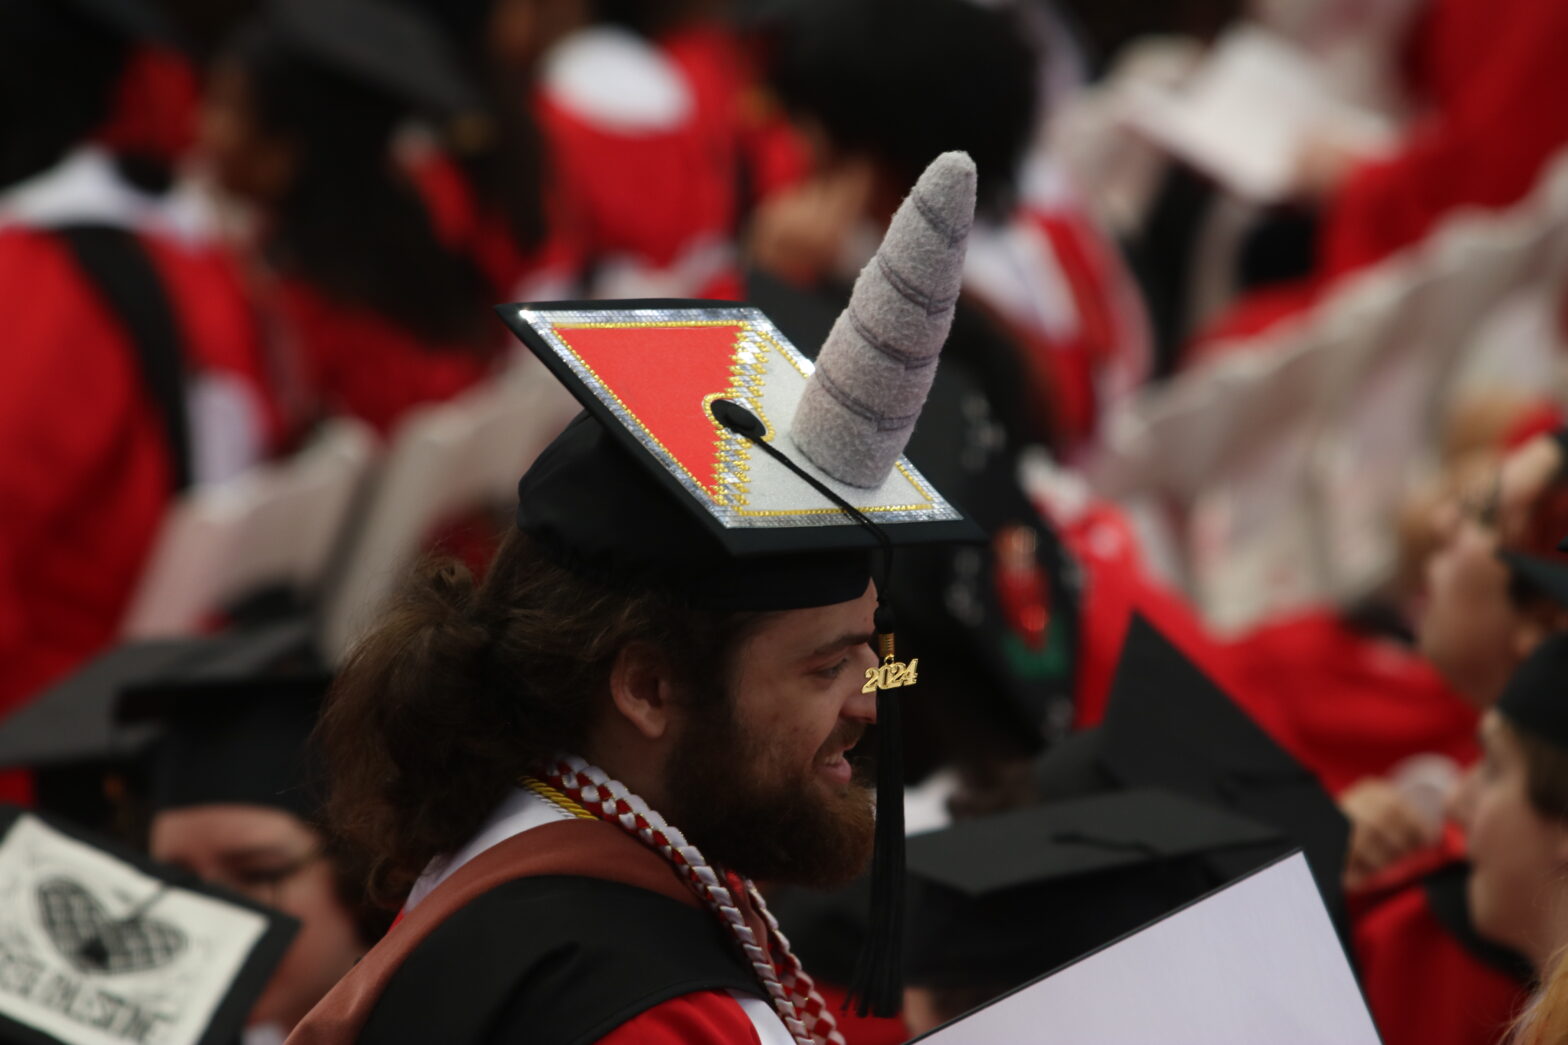 A student with a graduation cap on, with a narwhal horn attached to the top.